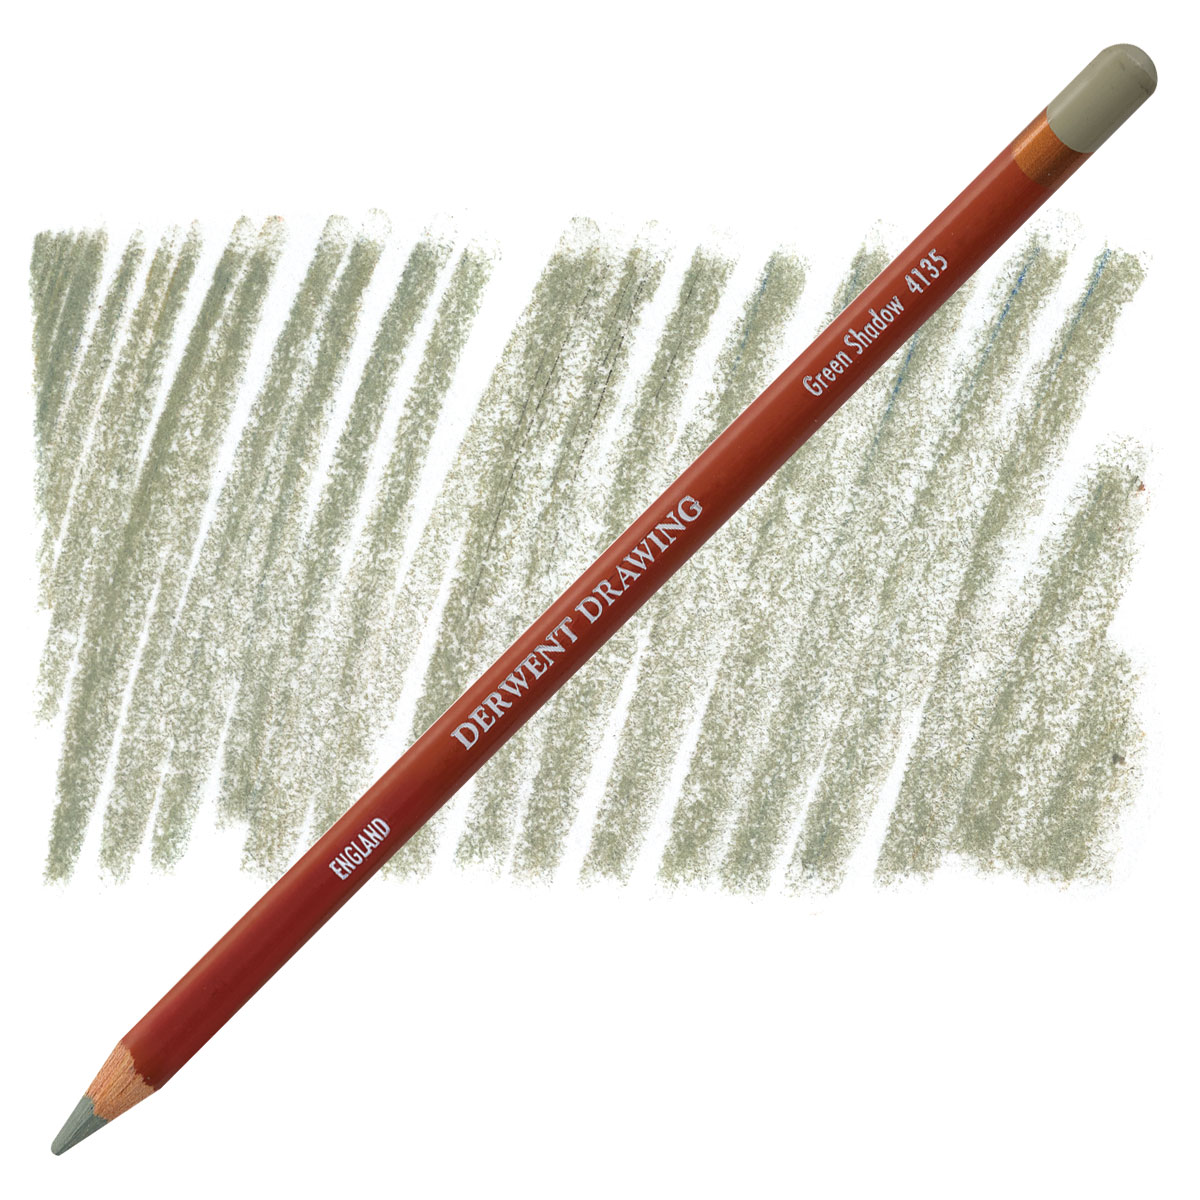 Derwent Drawing - 12 Soft Drawing Pencils - The Deckle Edge